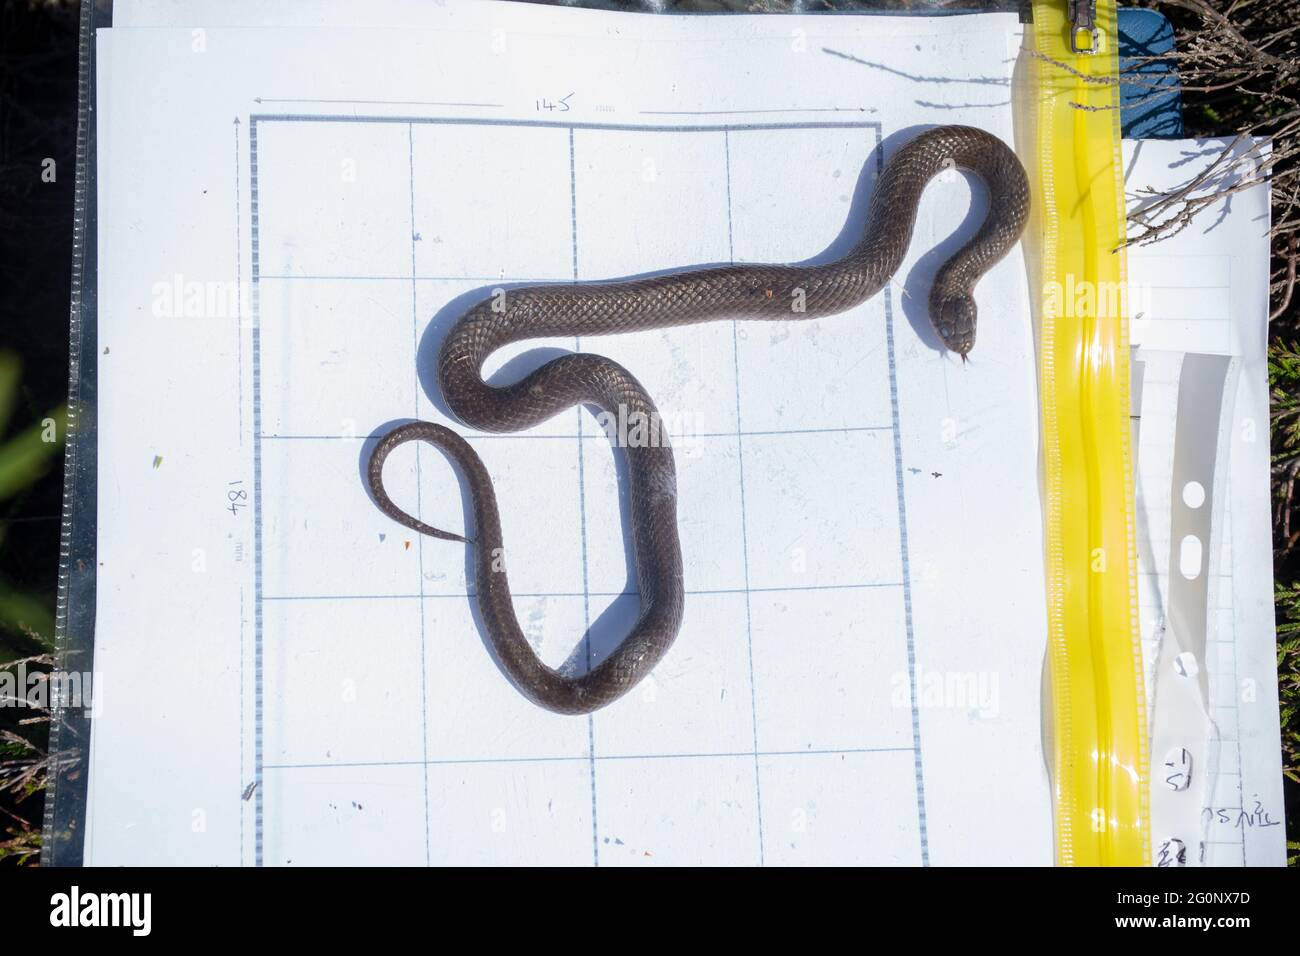 Measuring the length of a smooth snake in the field using a grid, UK. Under licence Stock Photo